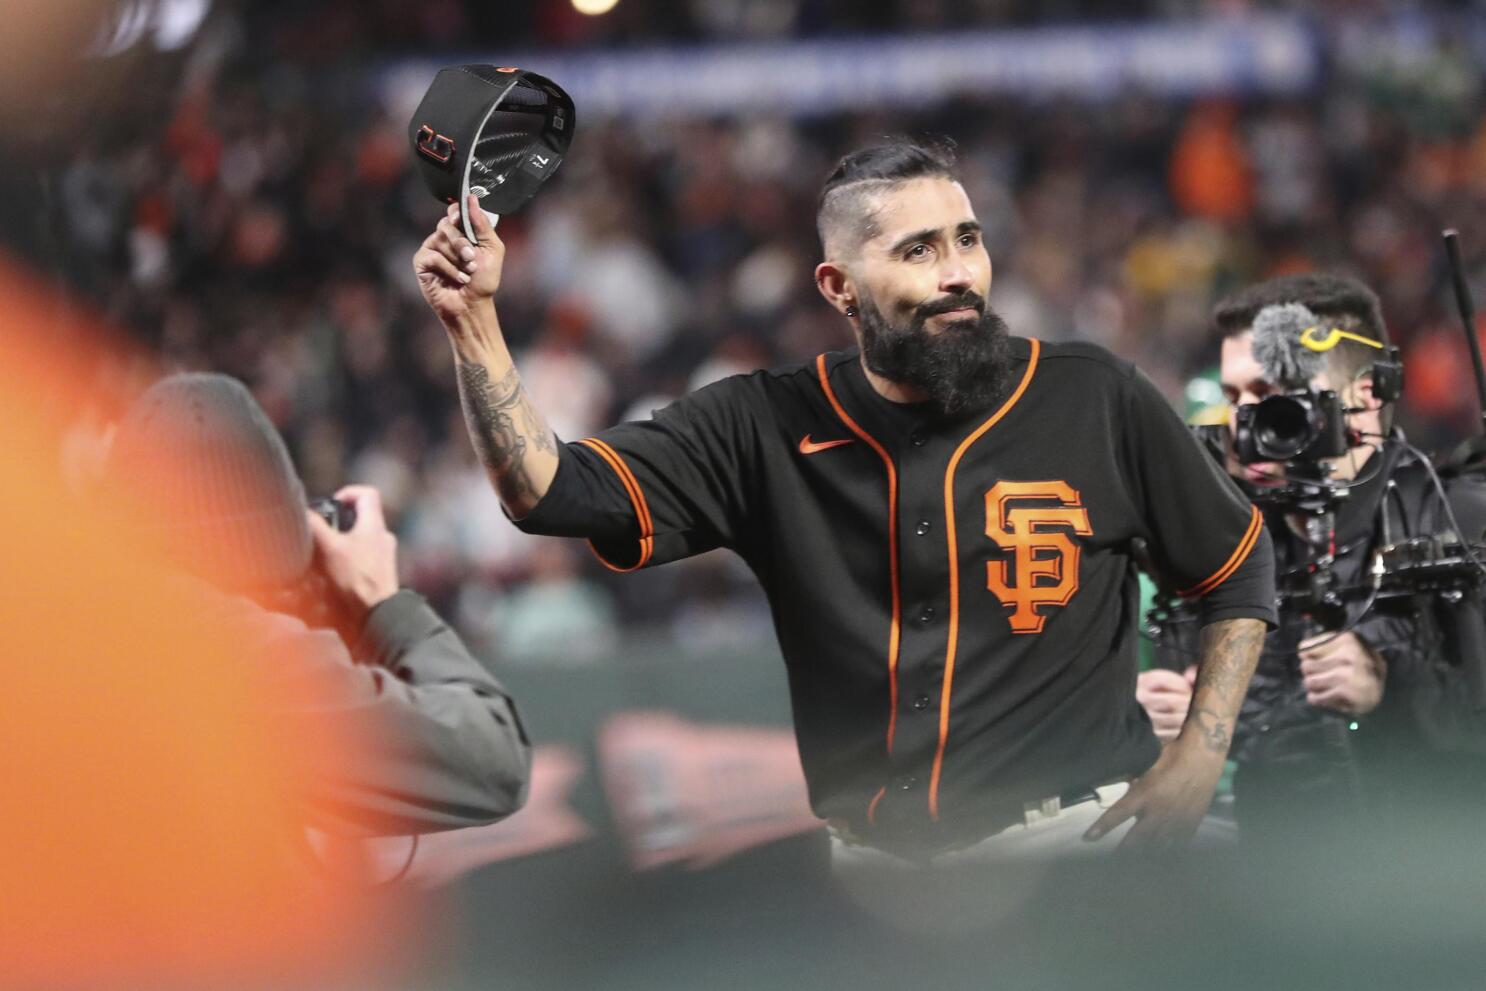 Sergio Romo retires as Giant after pitching one final time